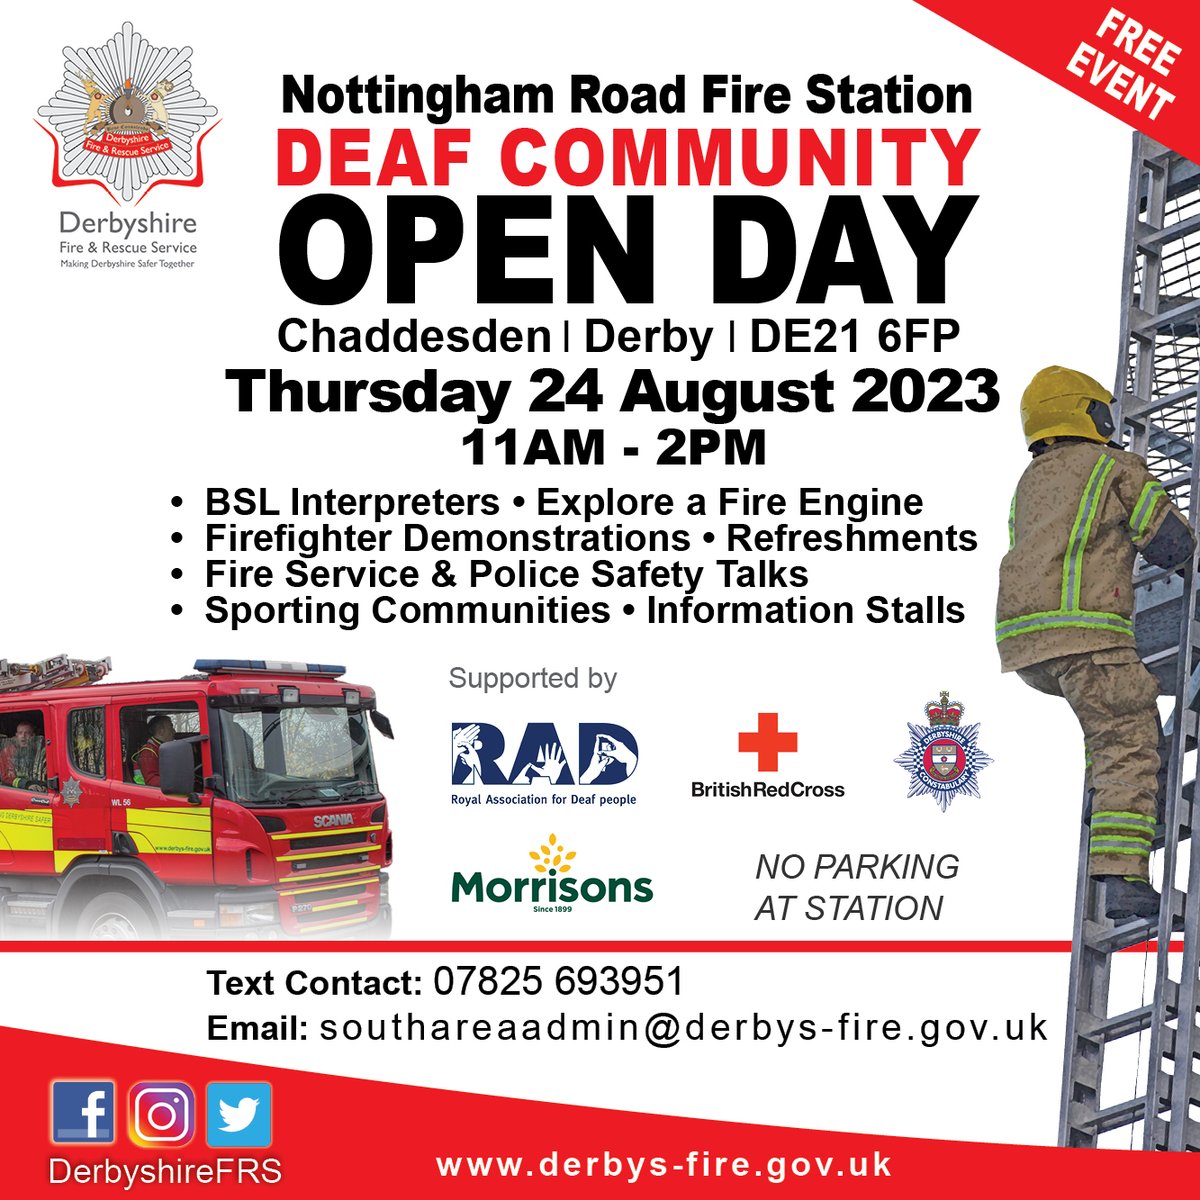 Due to the success of last years Open Day for our Deaf Community we are holding another one on the 24th August. Firefighters and Community Safety Officers will be opening the doors from 11am until 2pm with support from our partners. Lots to see and do!!